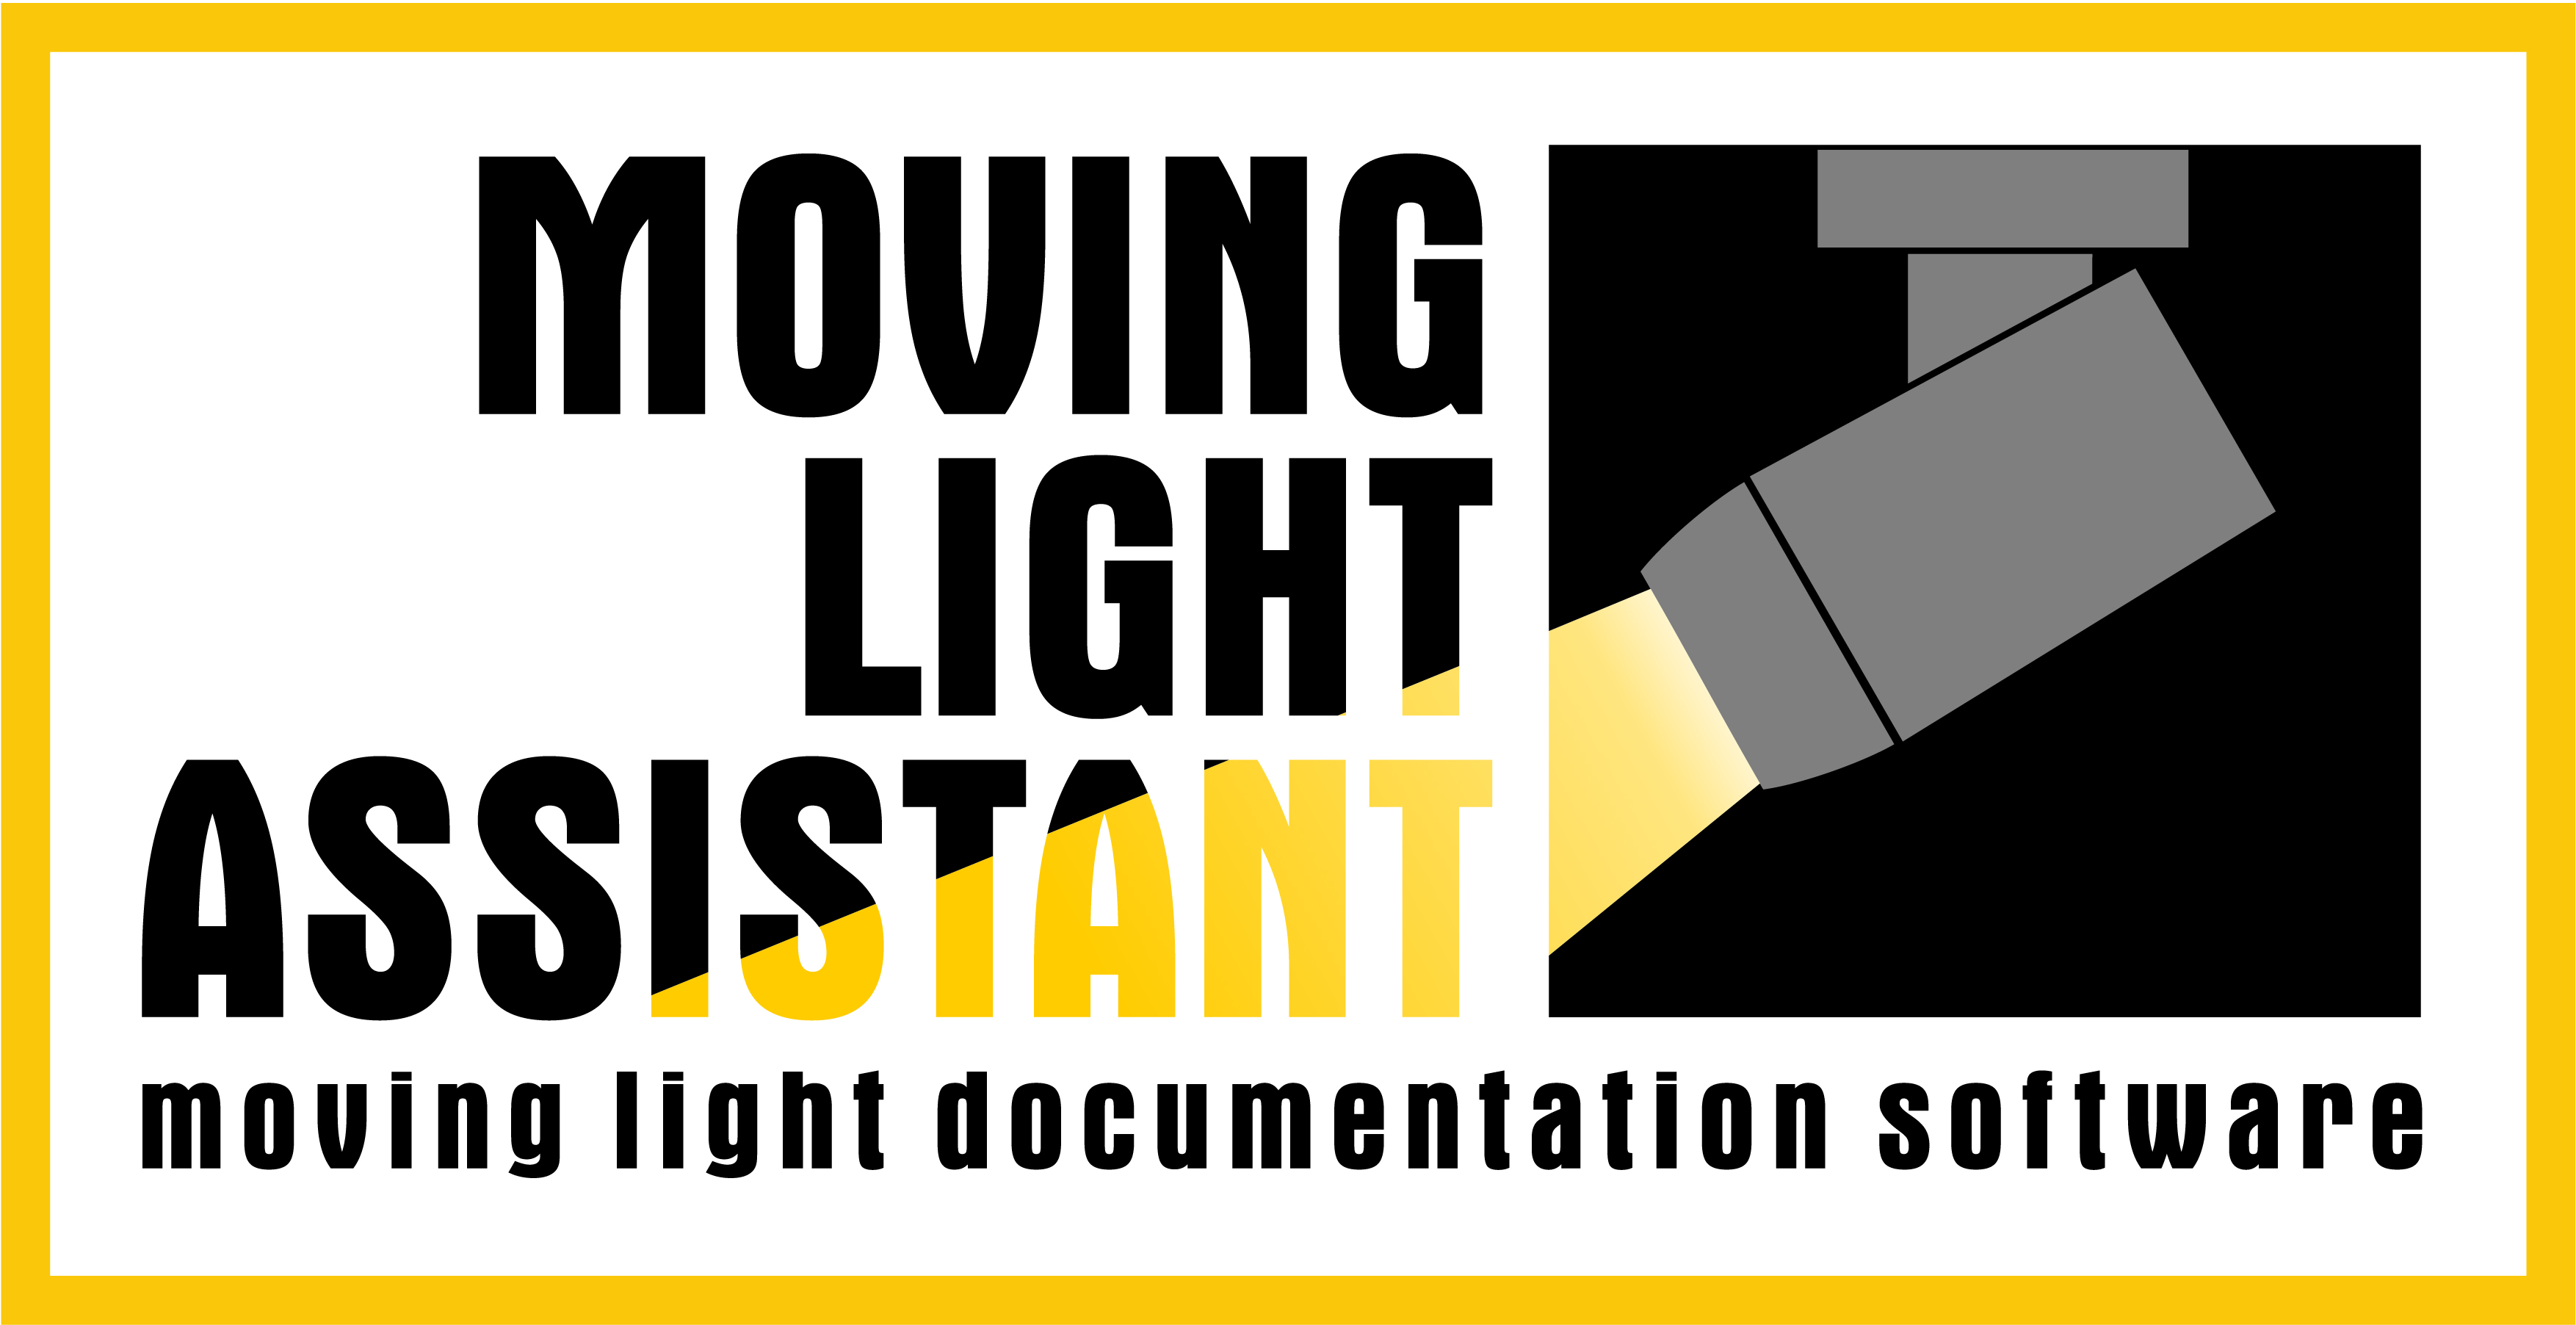 Moving Light Assistant Software